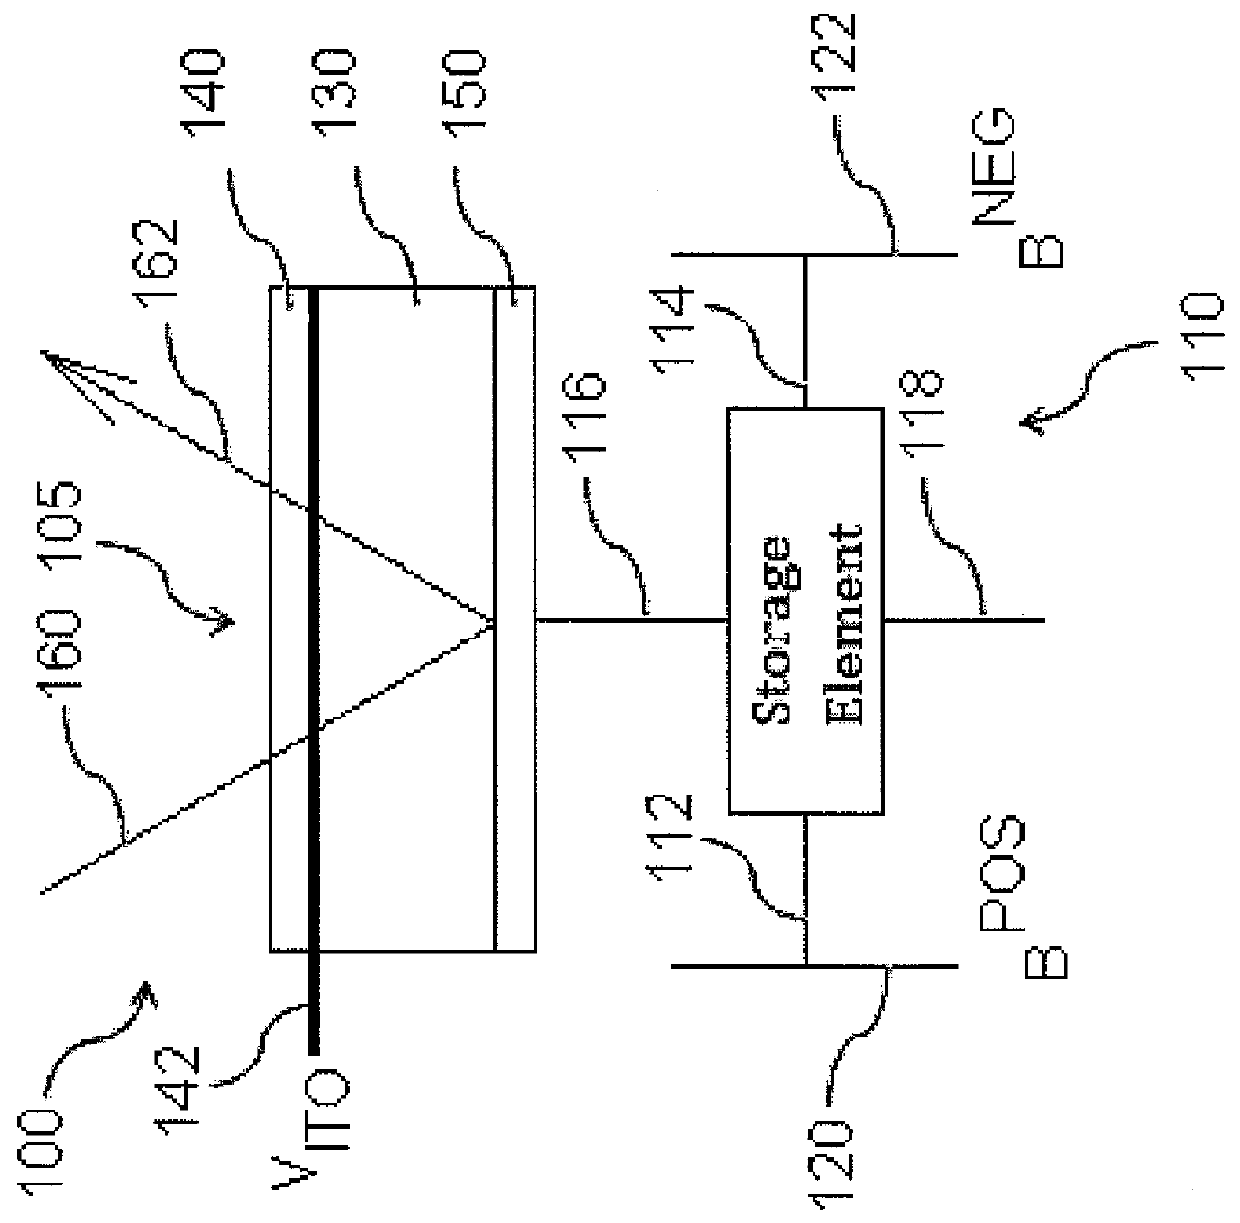 Modulation scheme for driving digital display systems